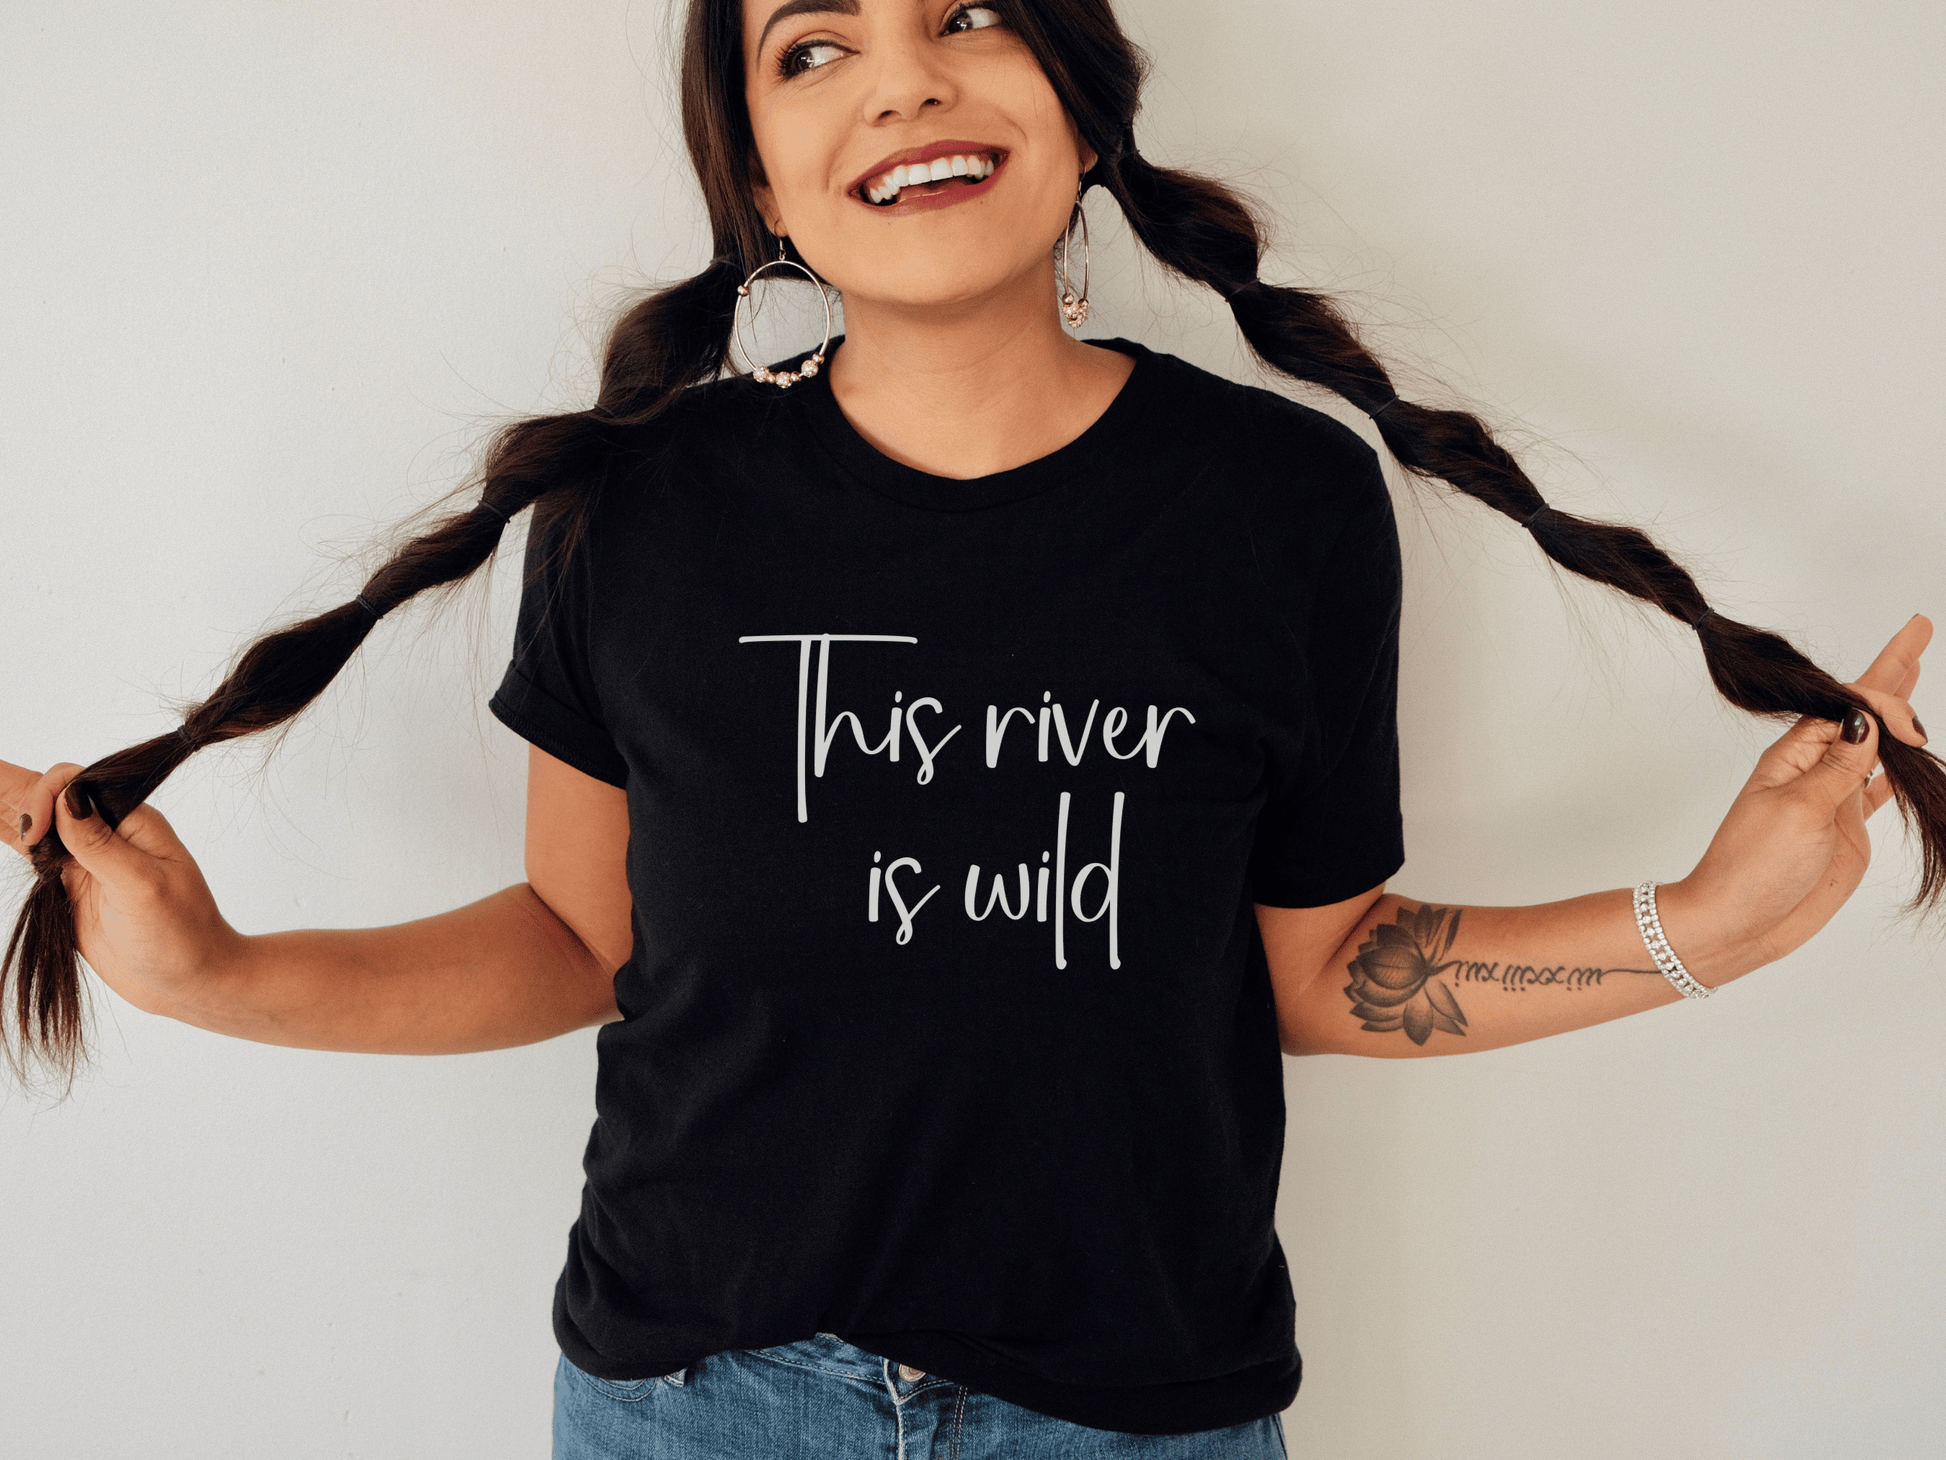 The KIllers "This River is Wild" T-Shirt in Black on a female